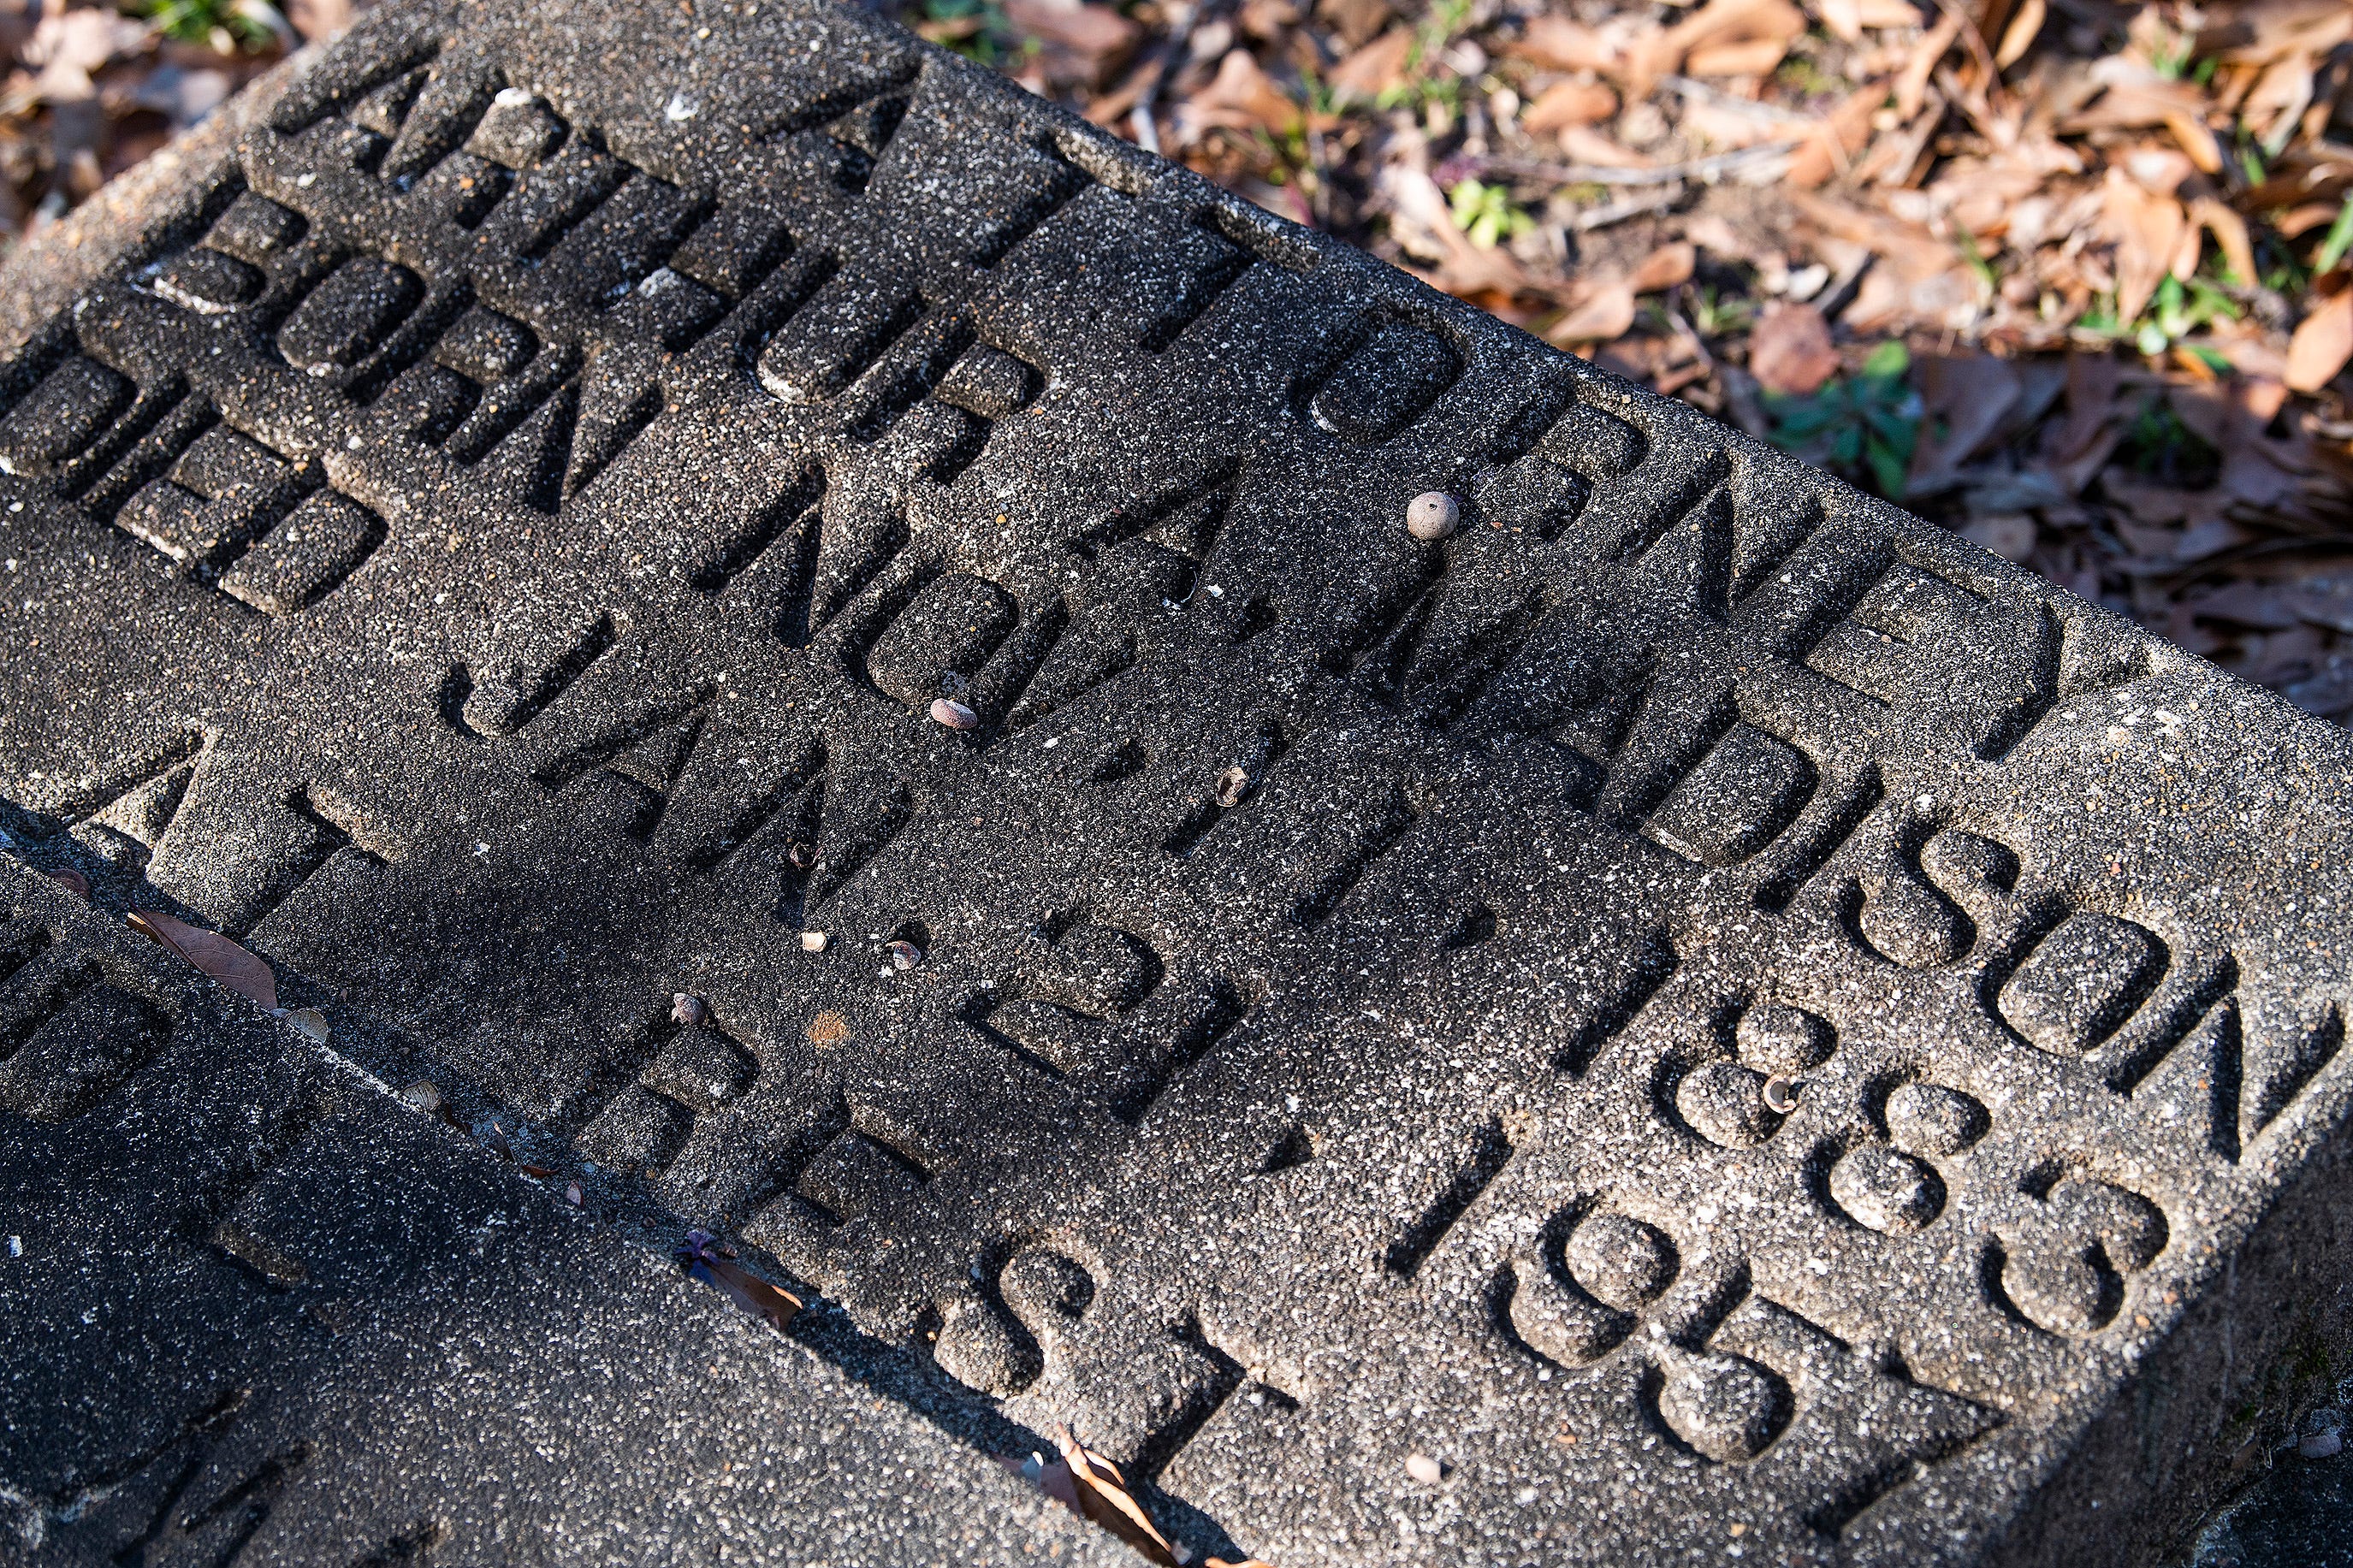 The gravesite of Arthur Madison in the Madison Park Memorial Cemetery in Montgomery, Ala., as seen on Wednesday morning February 17, 2021.